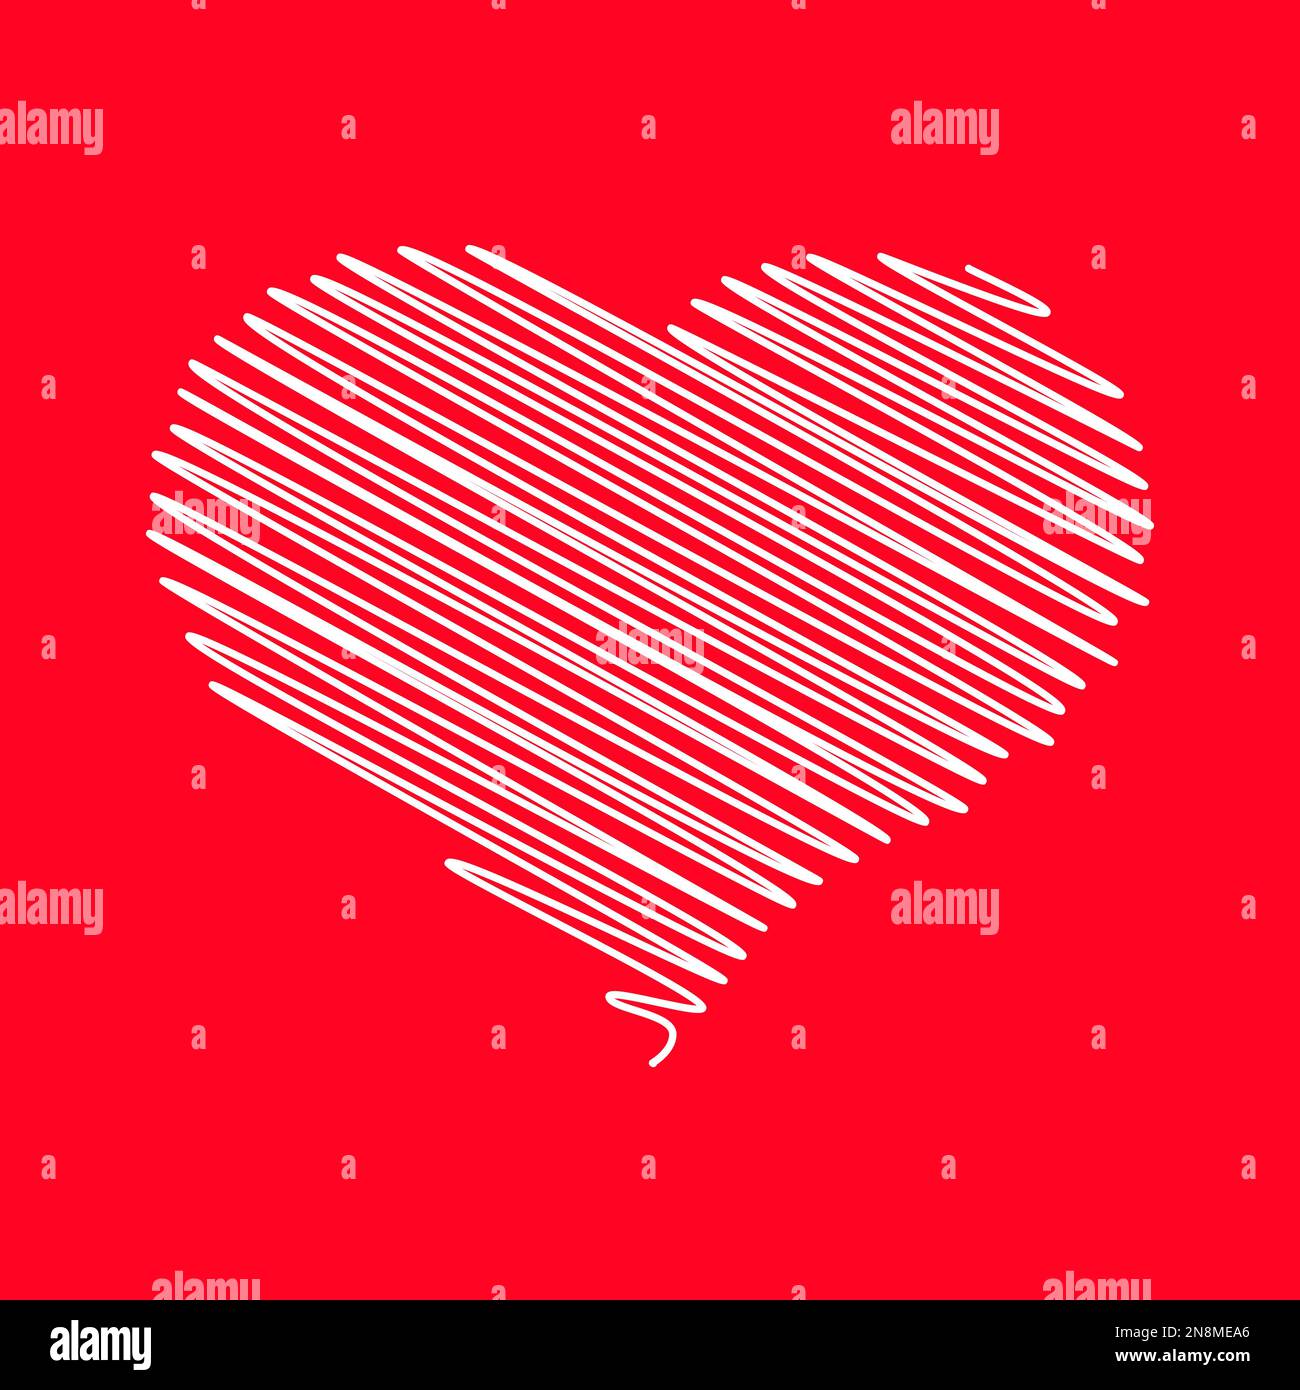 Heart - pencil scribble sketch drawing in white on red background. Valentine card doodle concept. Vector illustration. Stock Vector